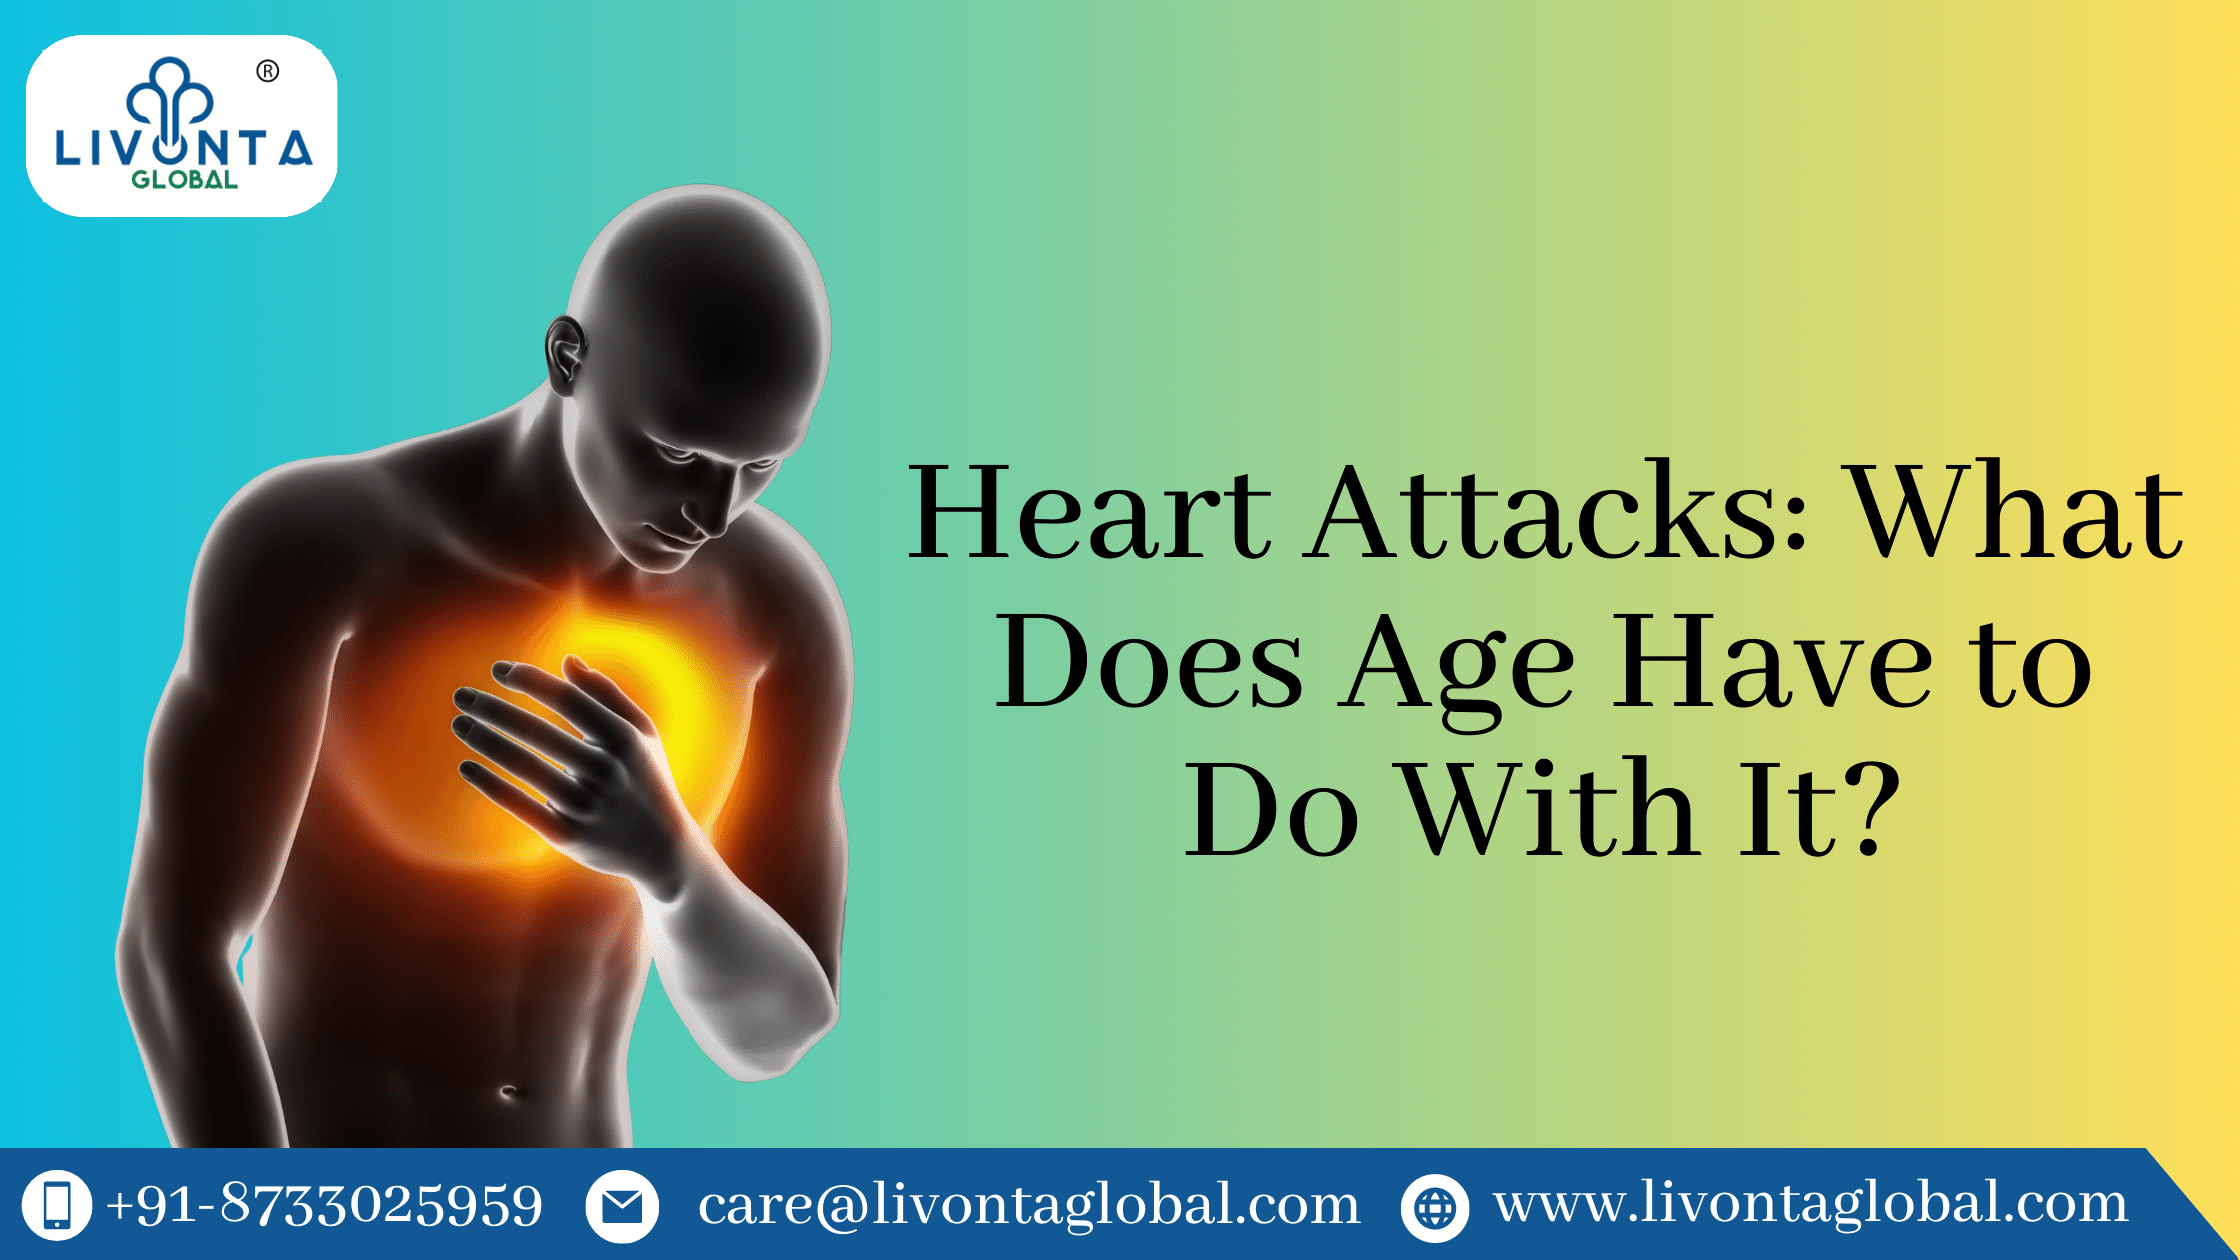 Heart Attacks: What Does Age Have to Do With It?